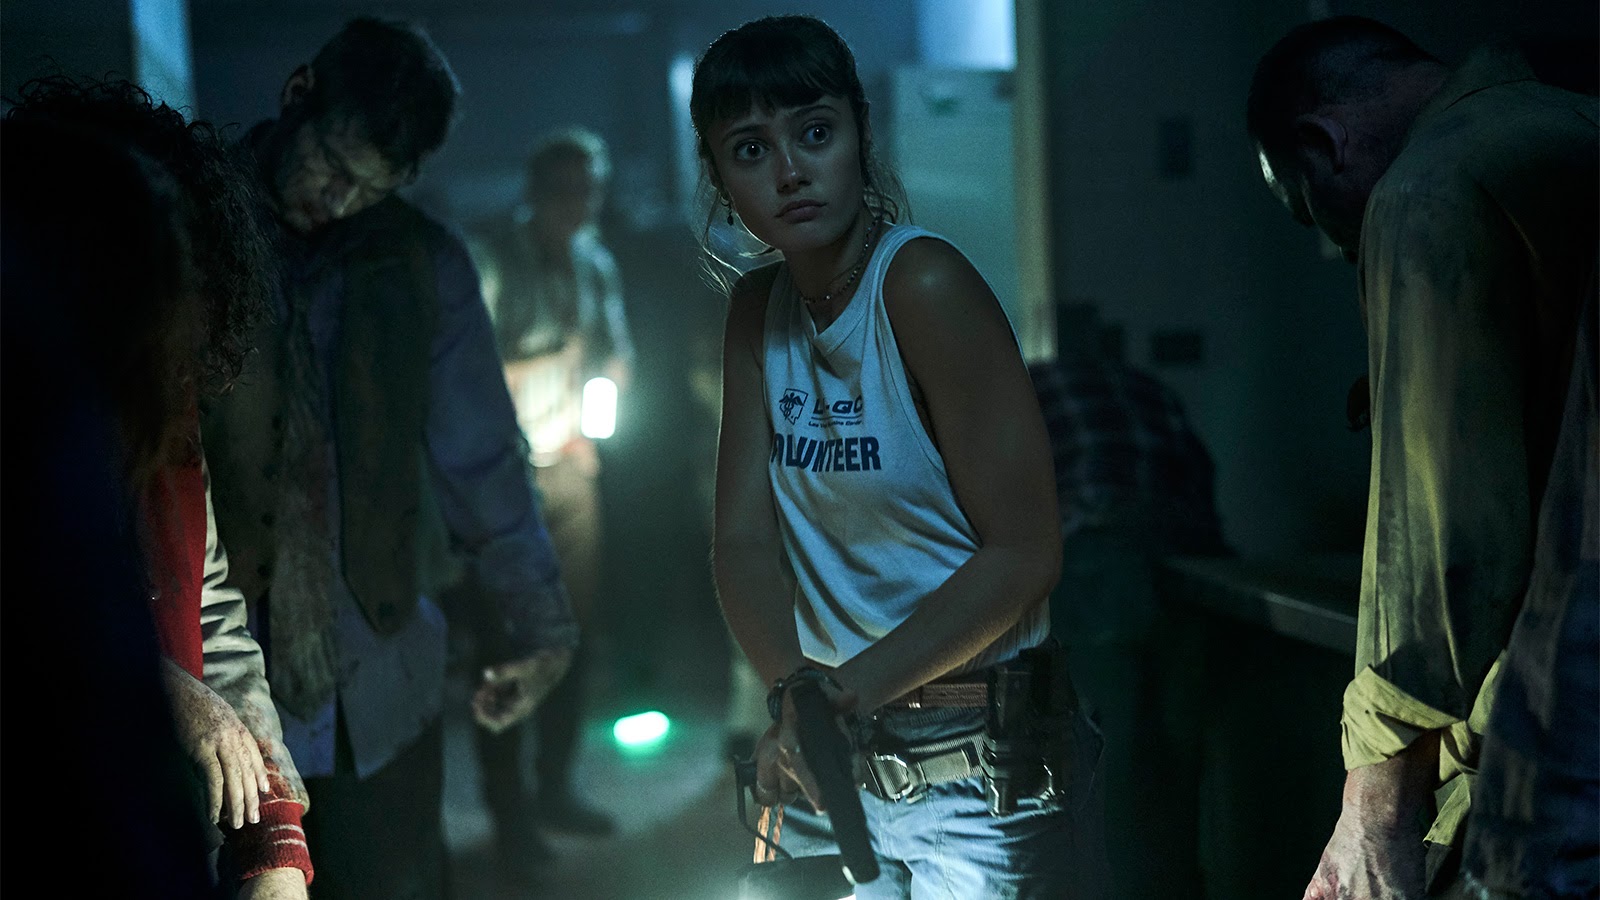 Army of the Dead’s Kate Ward, played by Ella Purnell